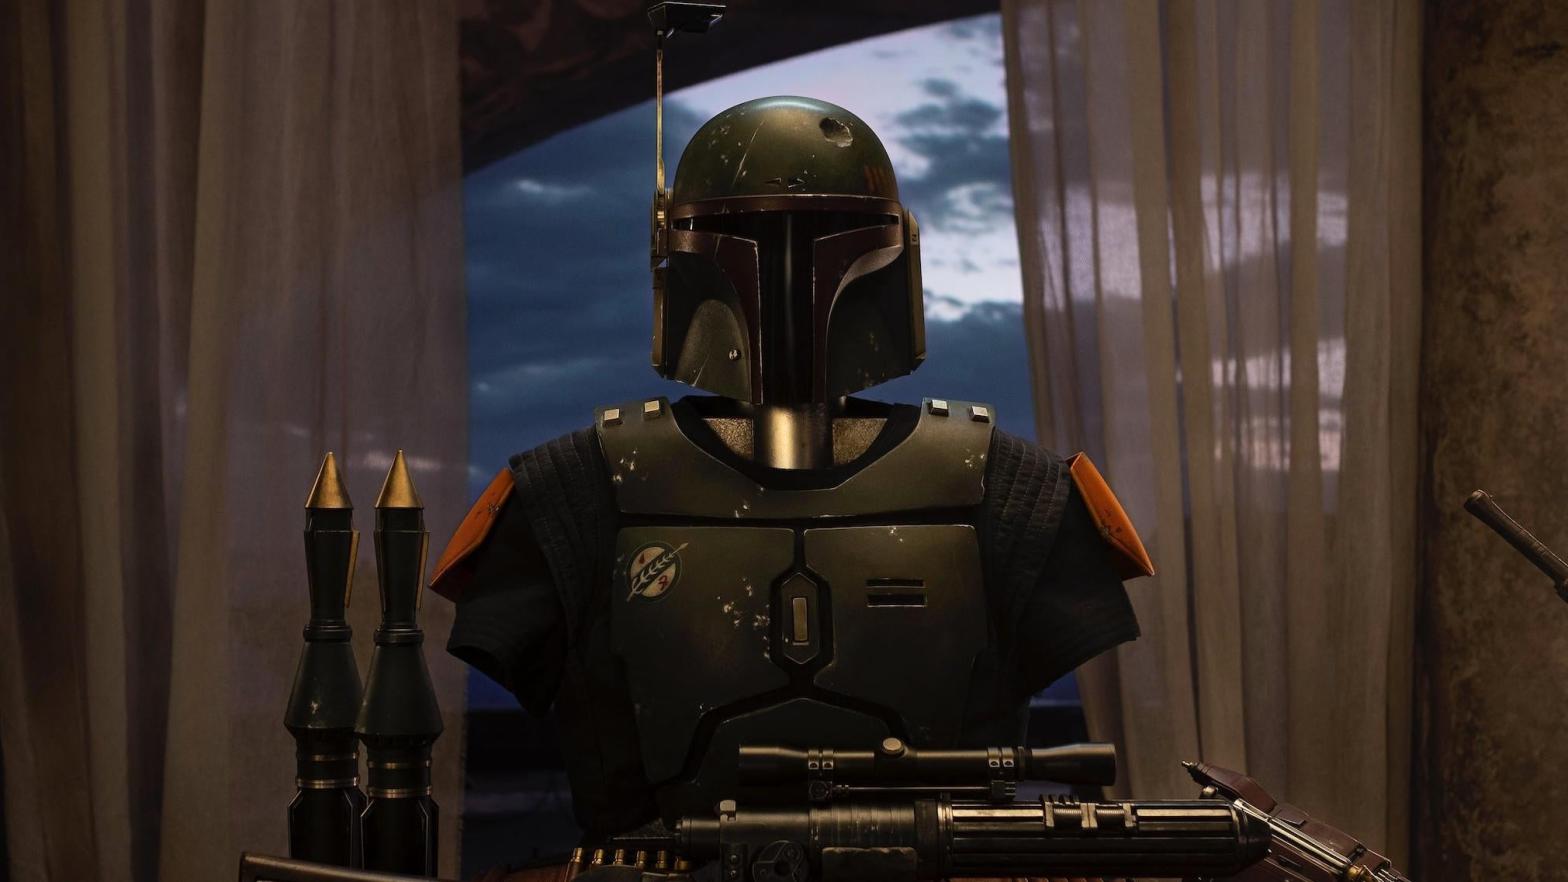 Boba Fett is healed and ready to go to war. (Image: Lucasfilm)